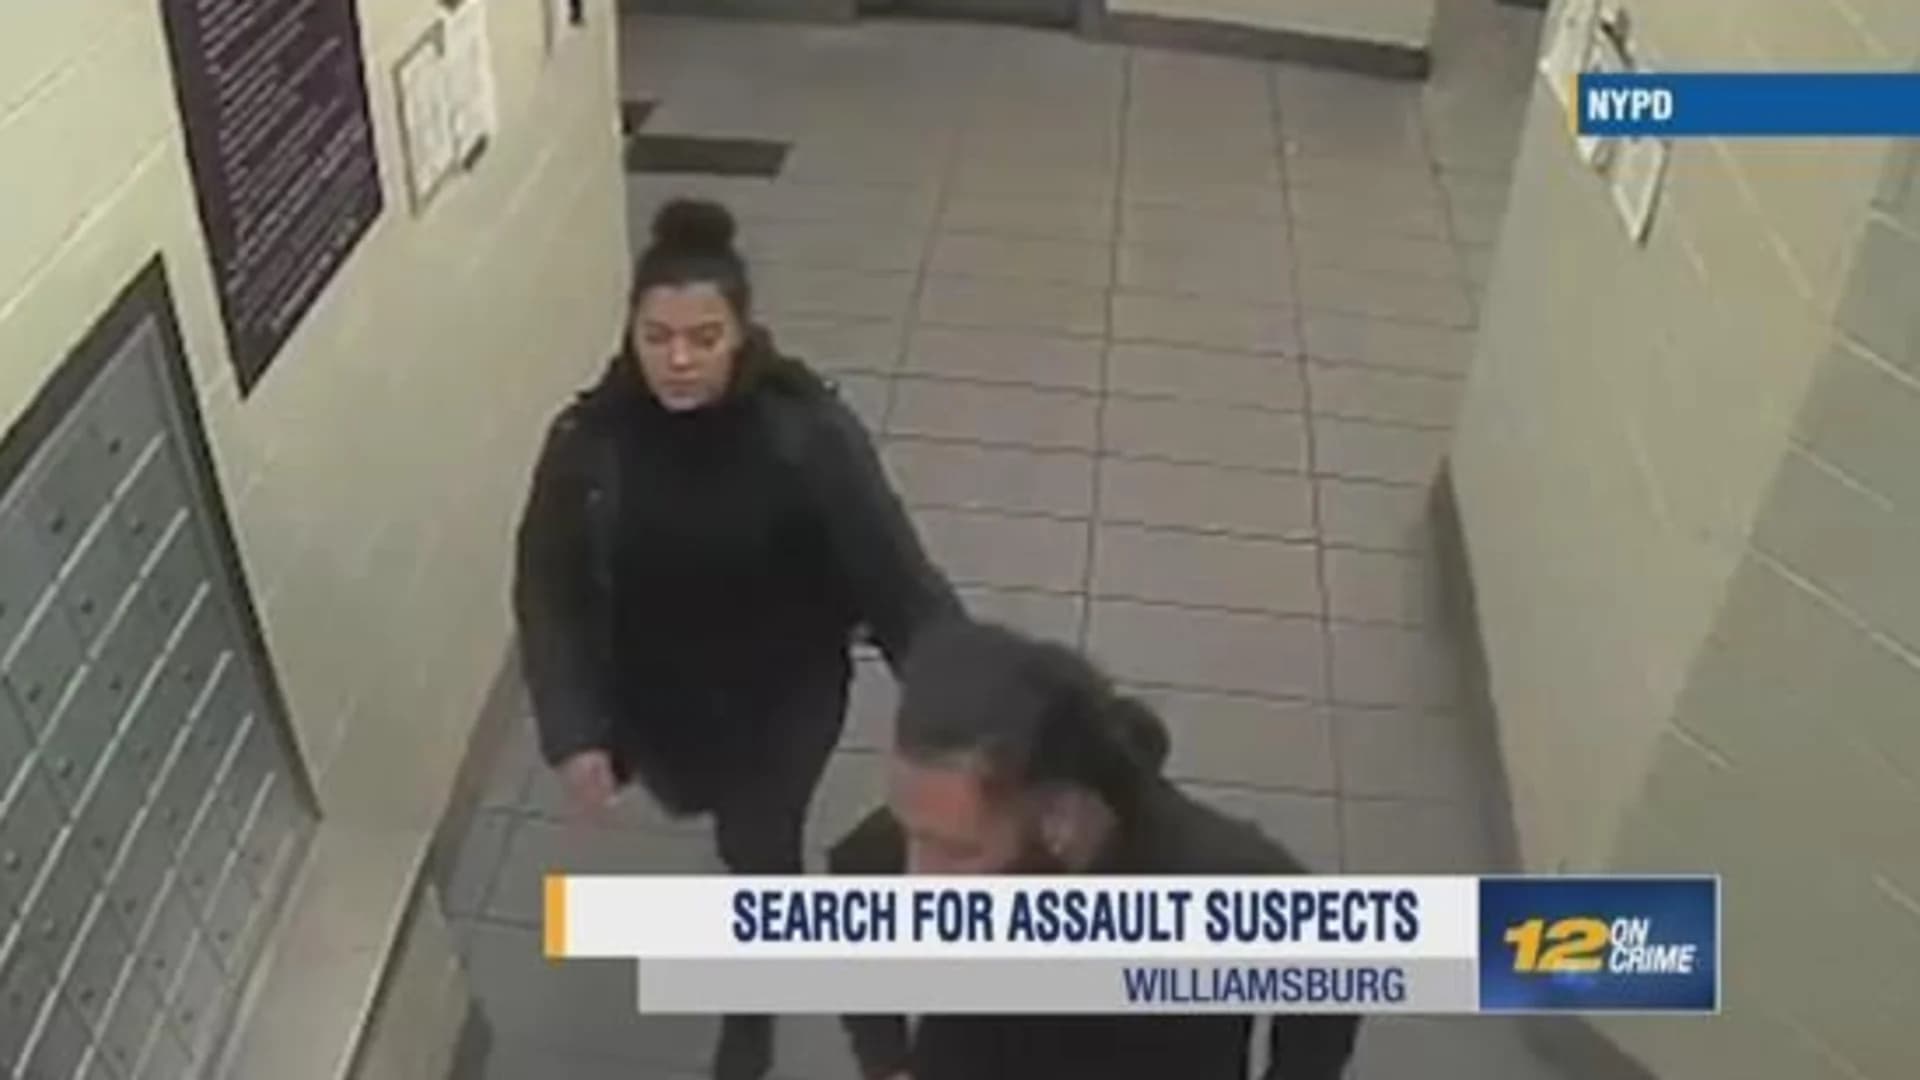 Police looking for suspects in connection to Williamsburg assault